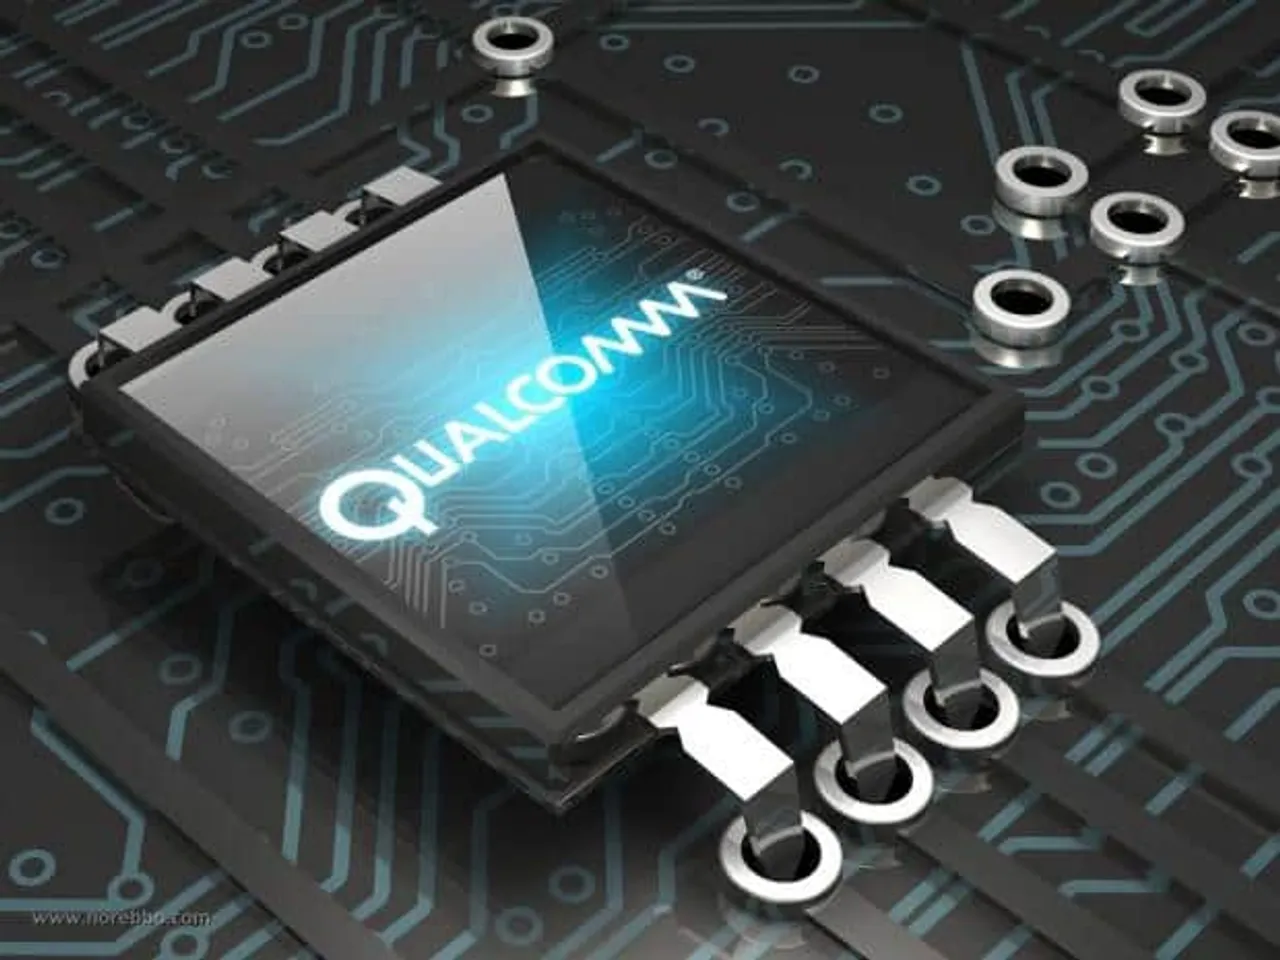 Qualcomm delivers around 1 million chips a day for connected applications